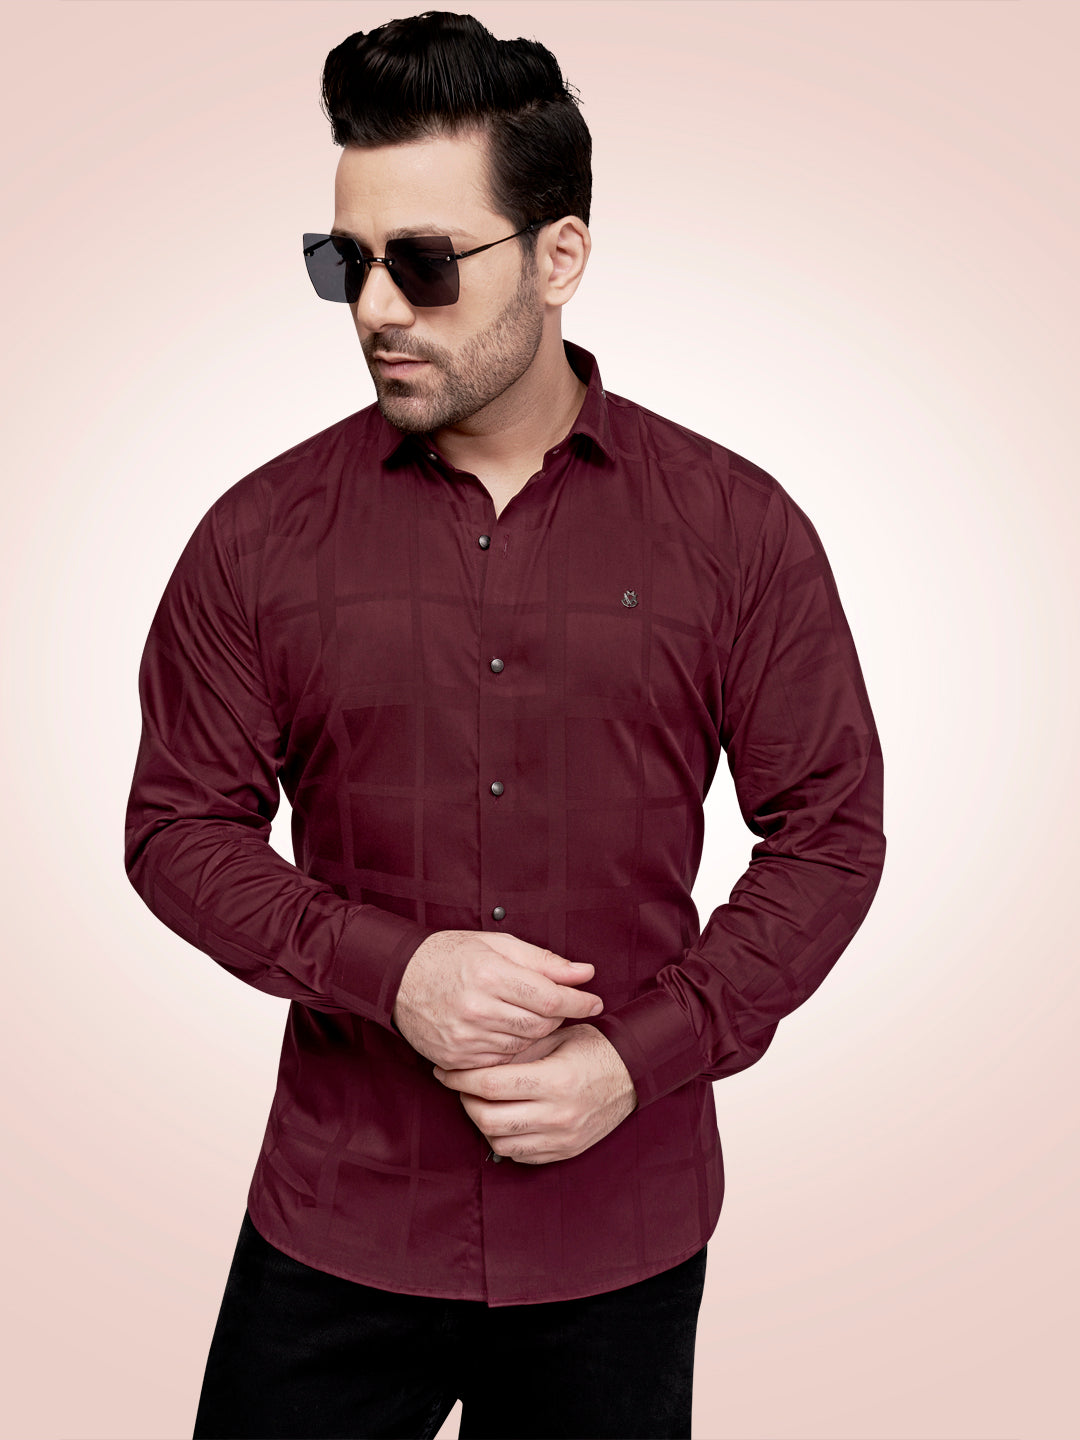 Black and White Self Checks Cocktail Shirt- Premium 60s CountsSelf Checks Cocktail Shirt- Premium 60s Counts Maroon